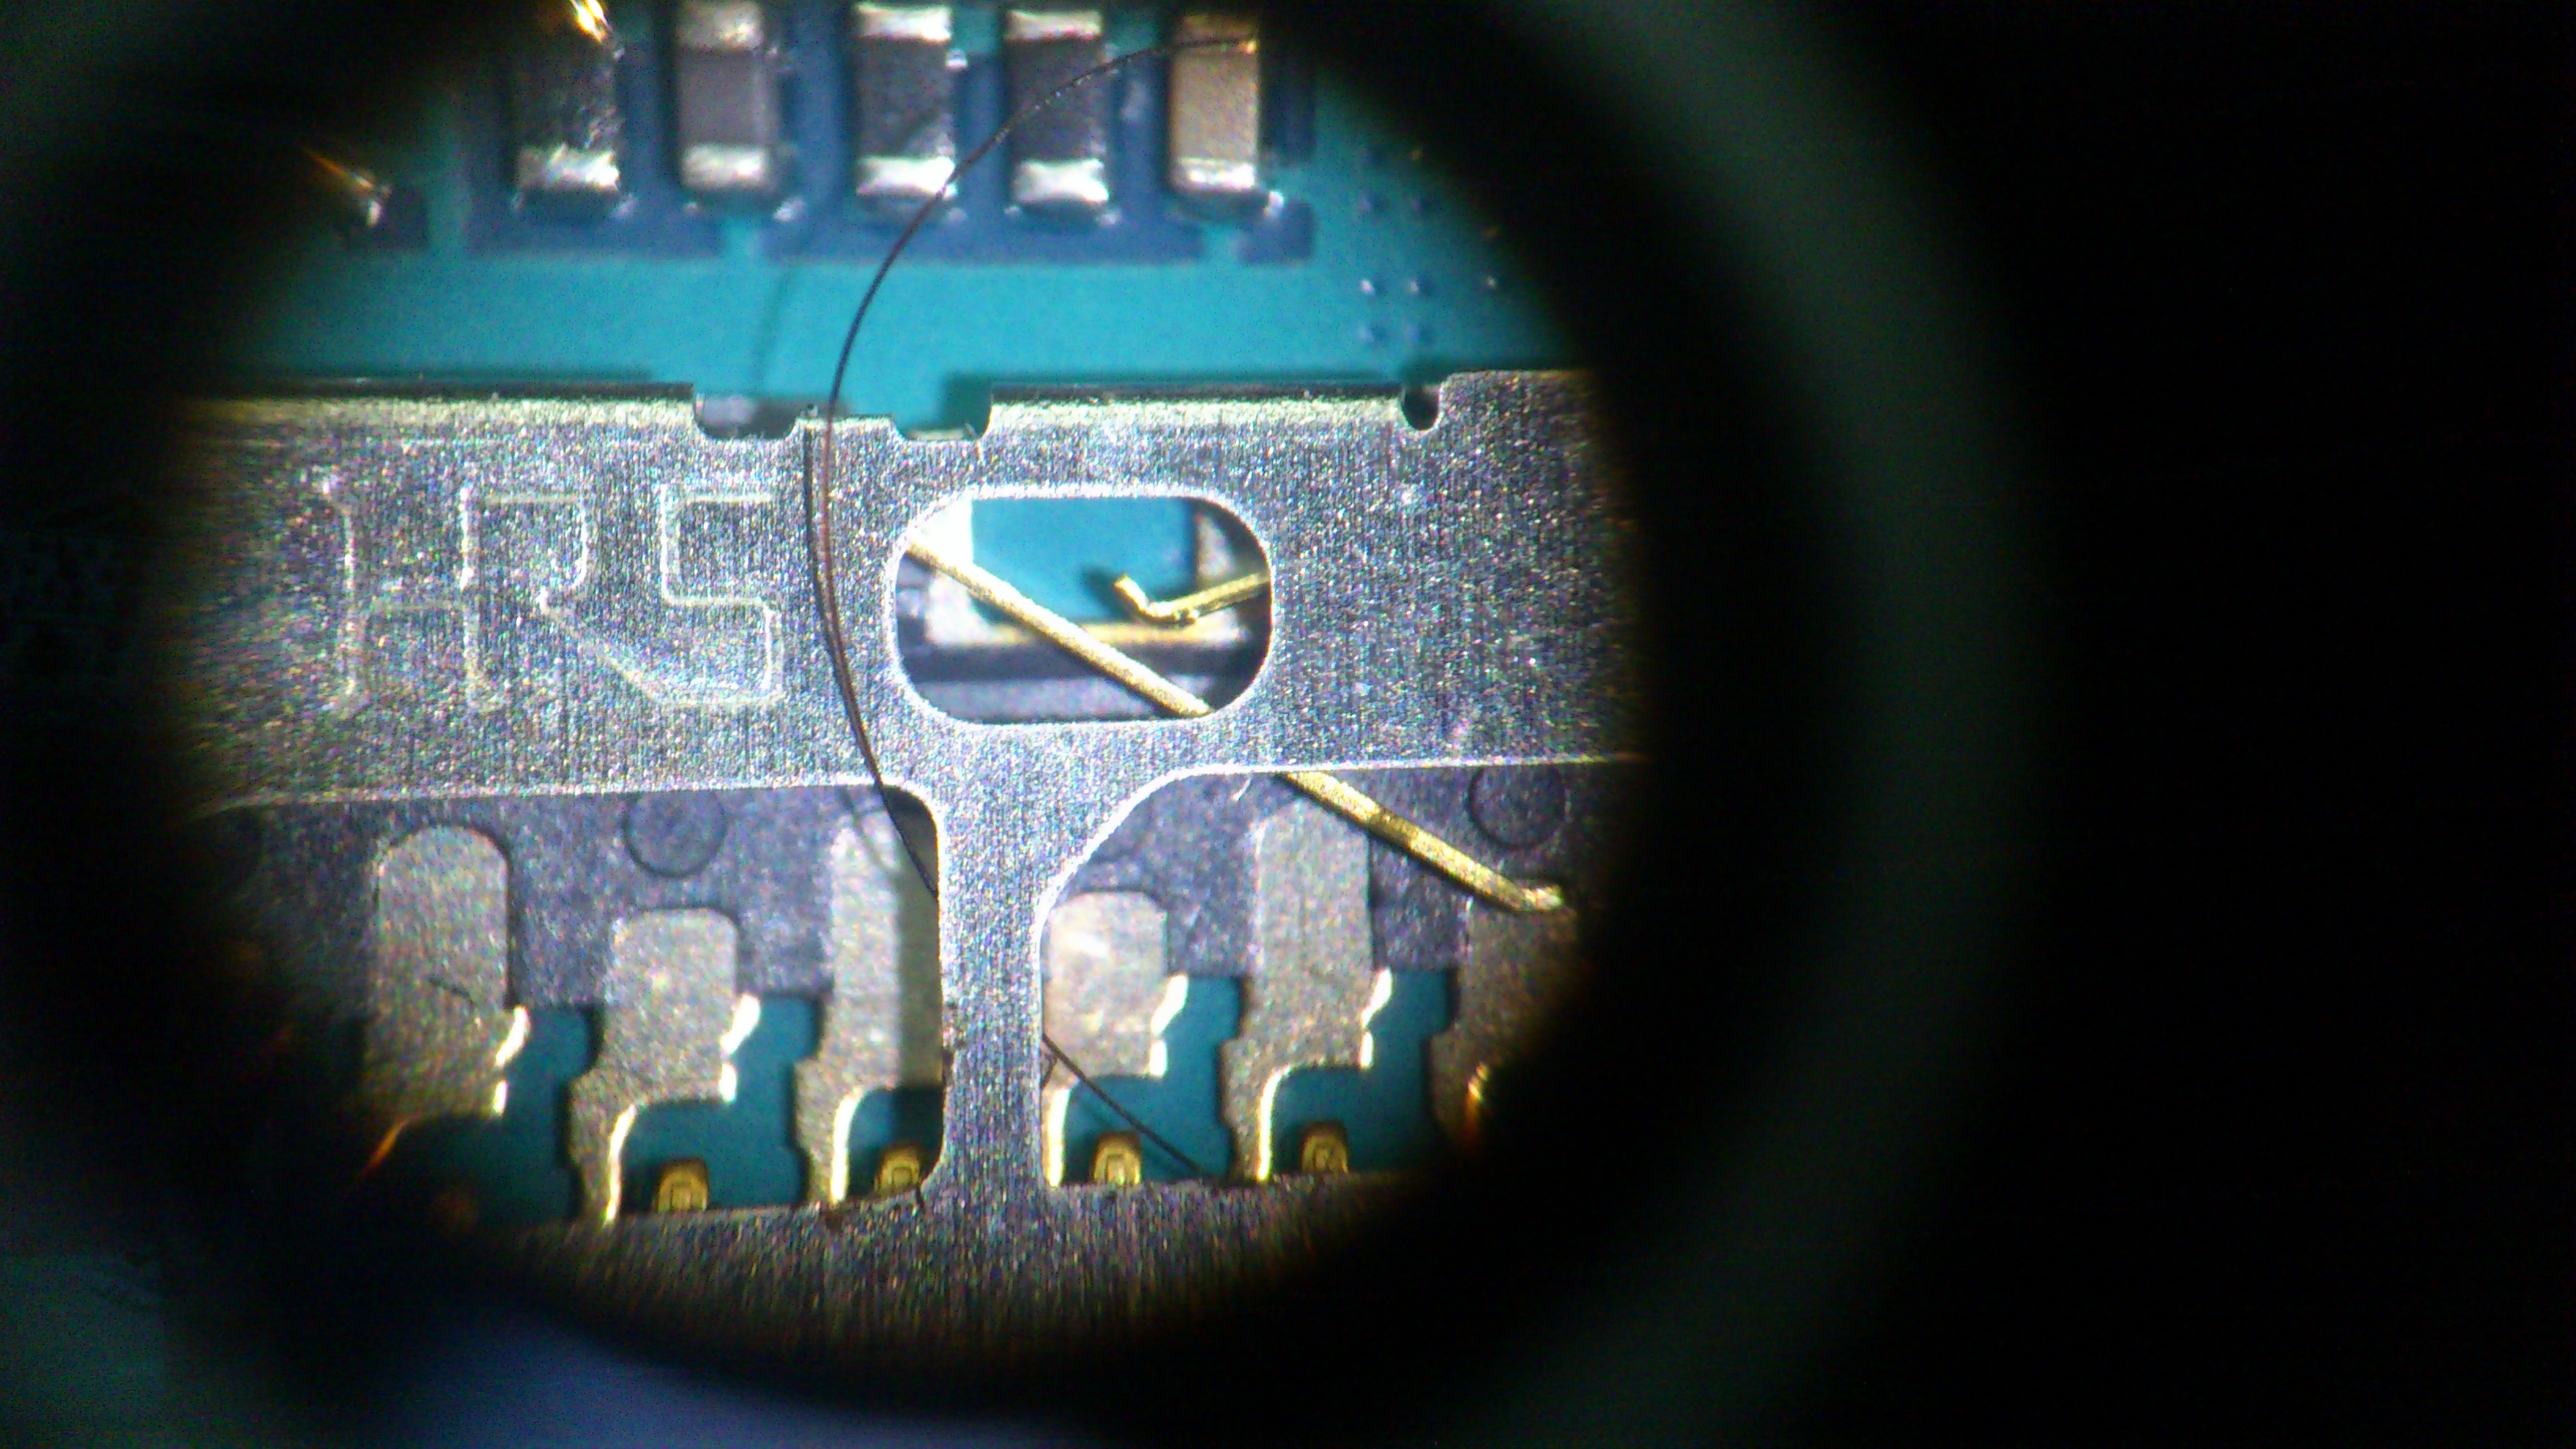 A strand of hair causing a microelectronic fault